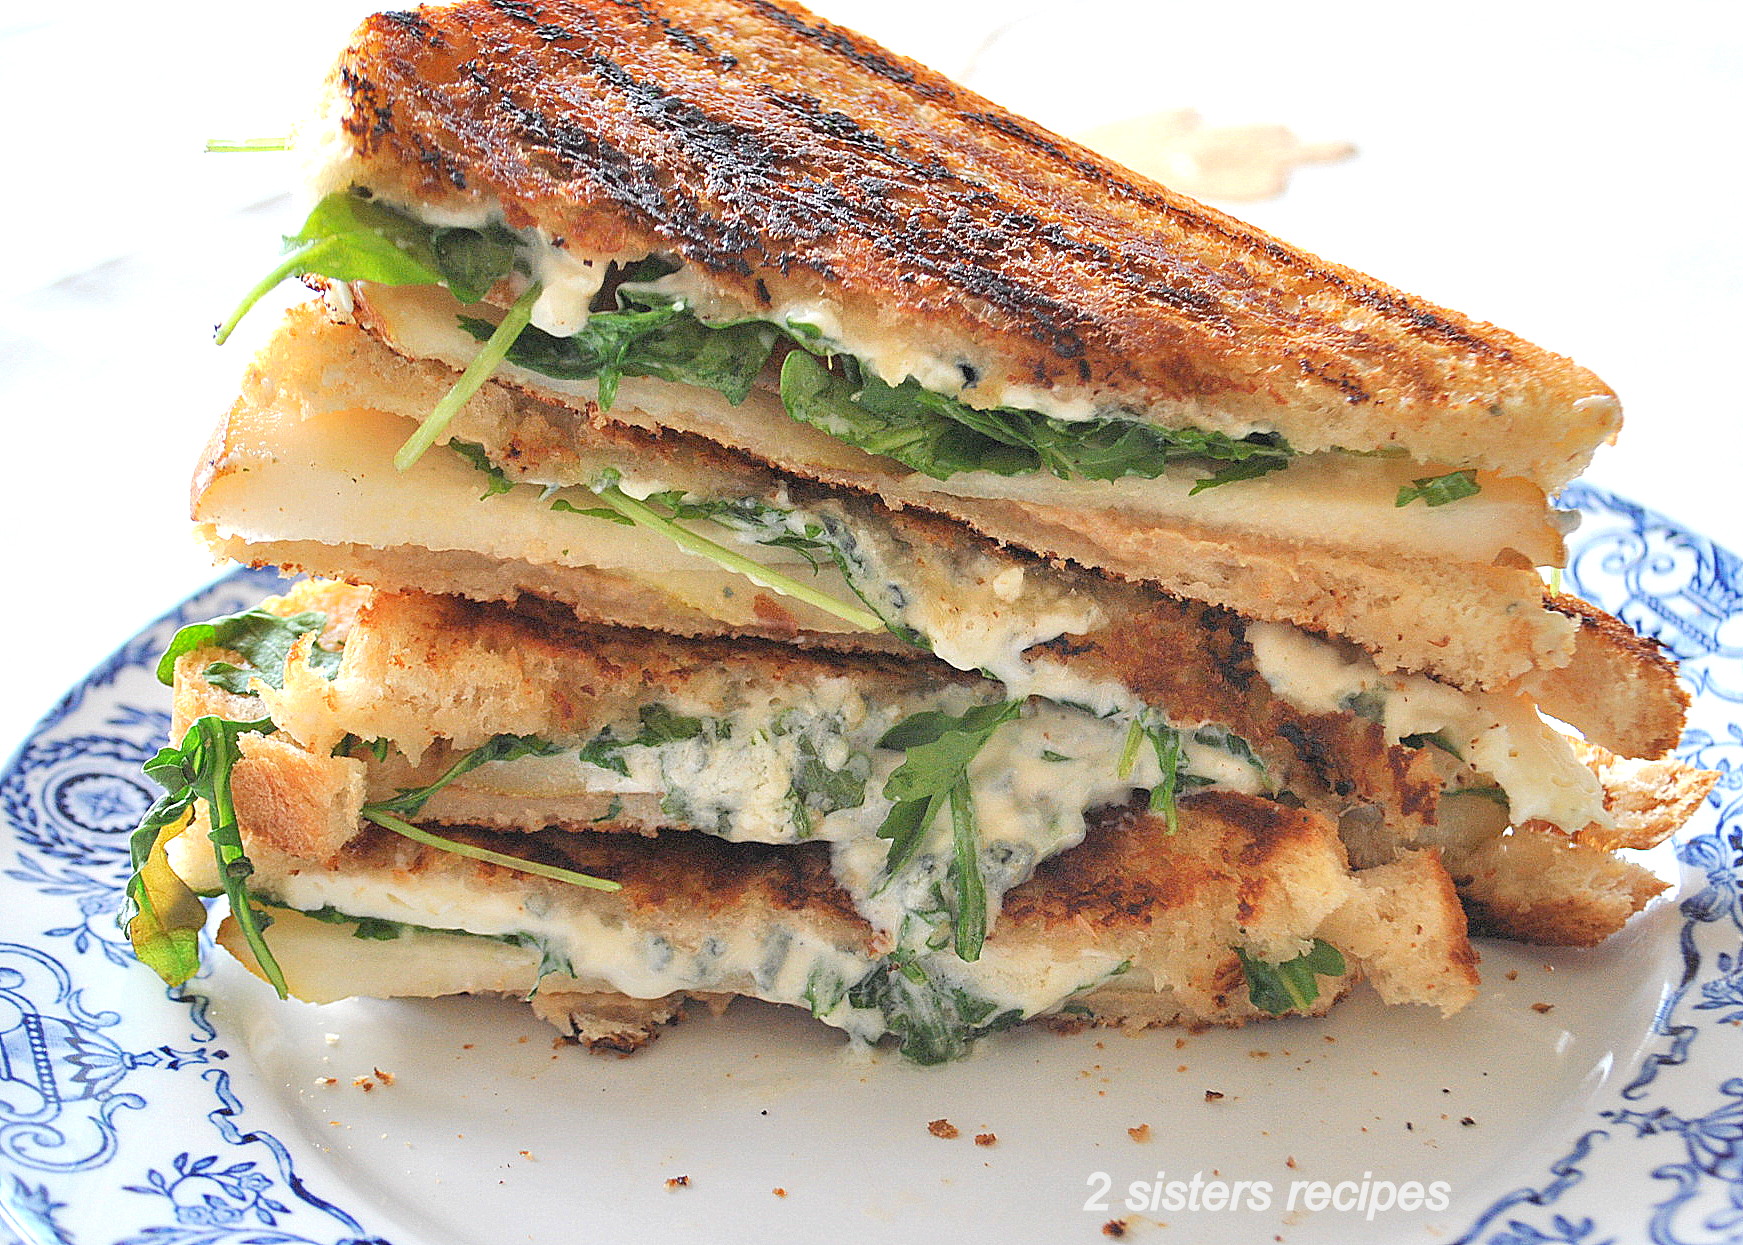 Grilled Cheese and Pear Sandwiches piled on top of one another on a blue and white plate.